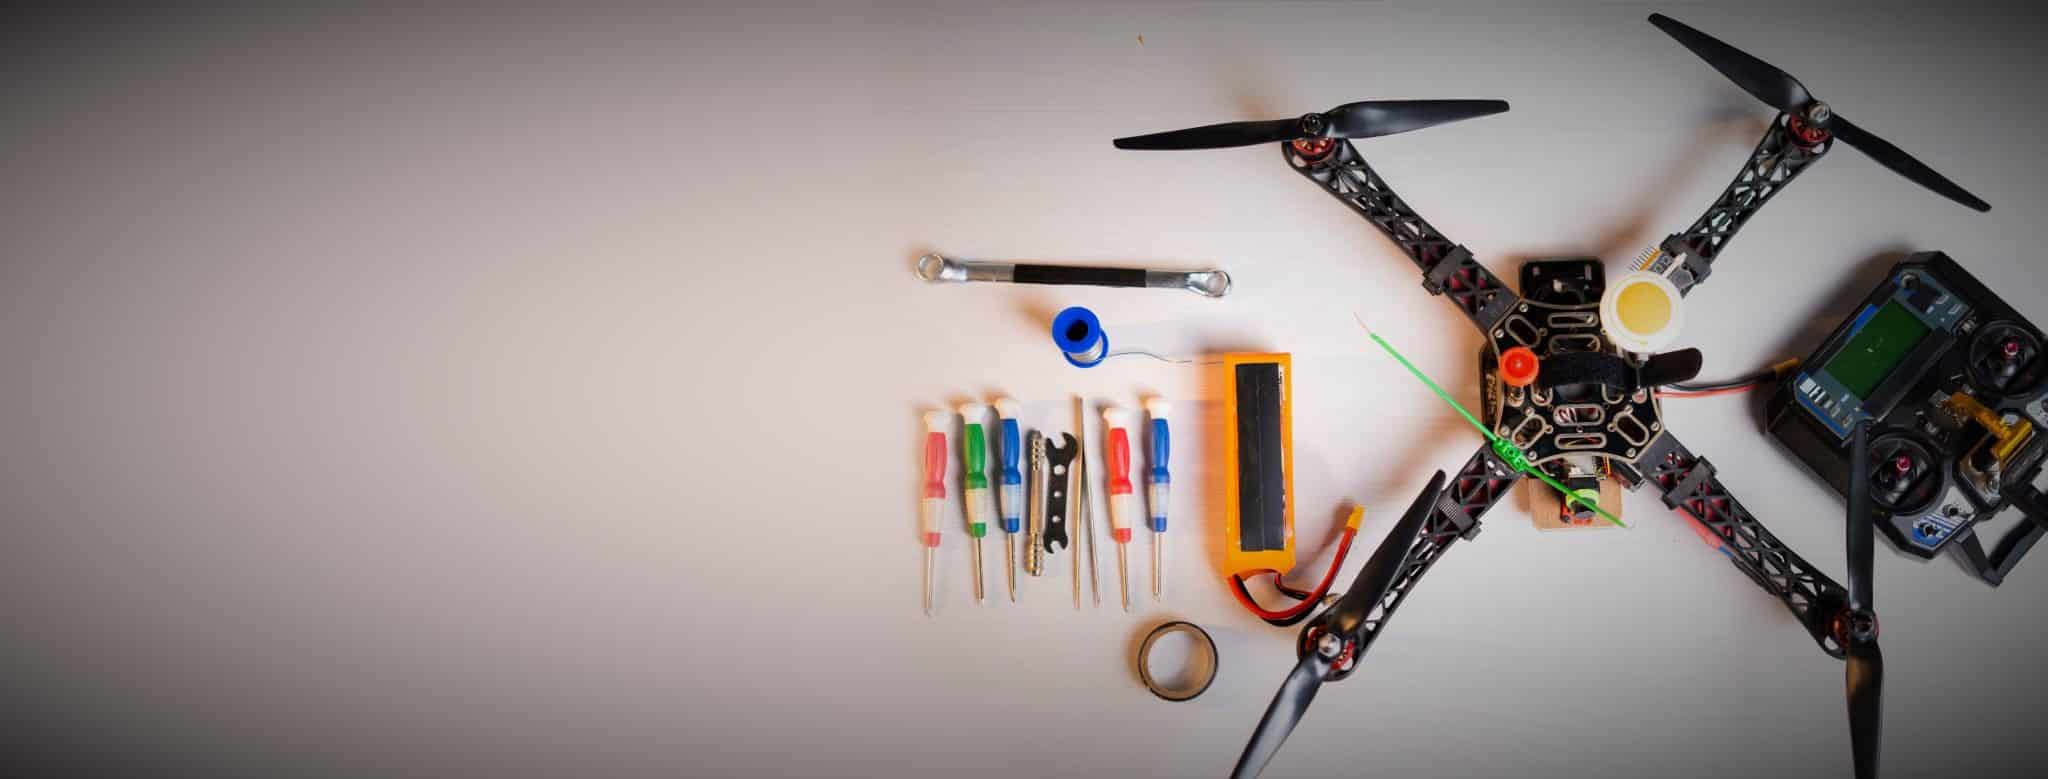 Can Homemade Drones be Countered? <br> Overcoming the DIY Drone Threat